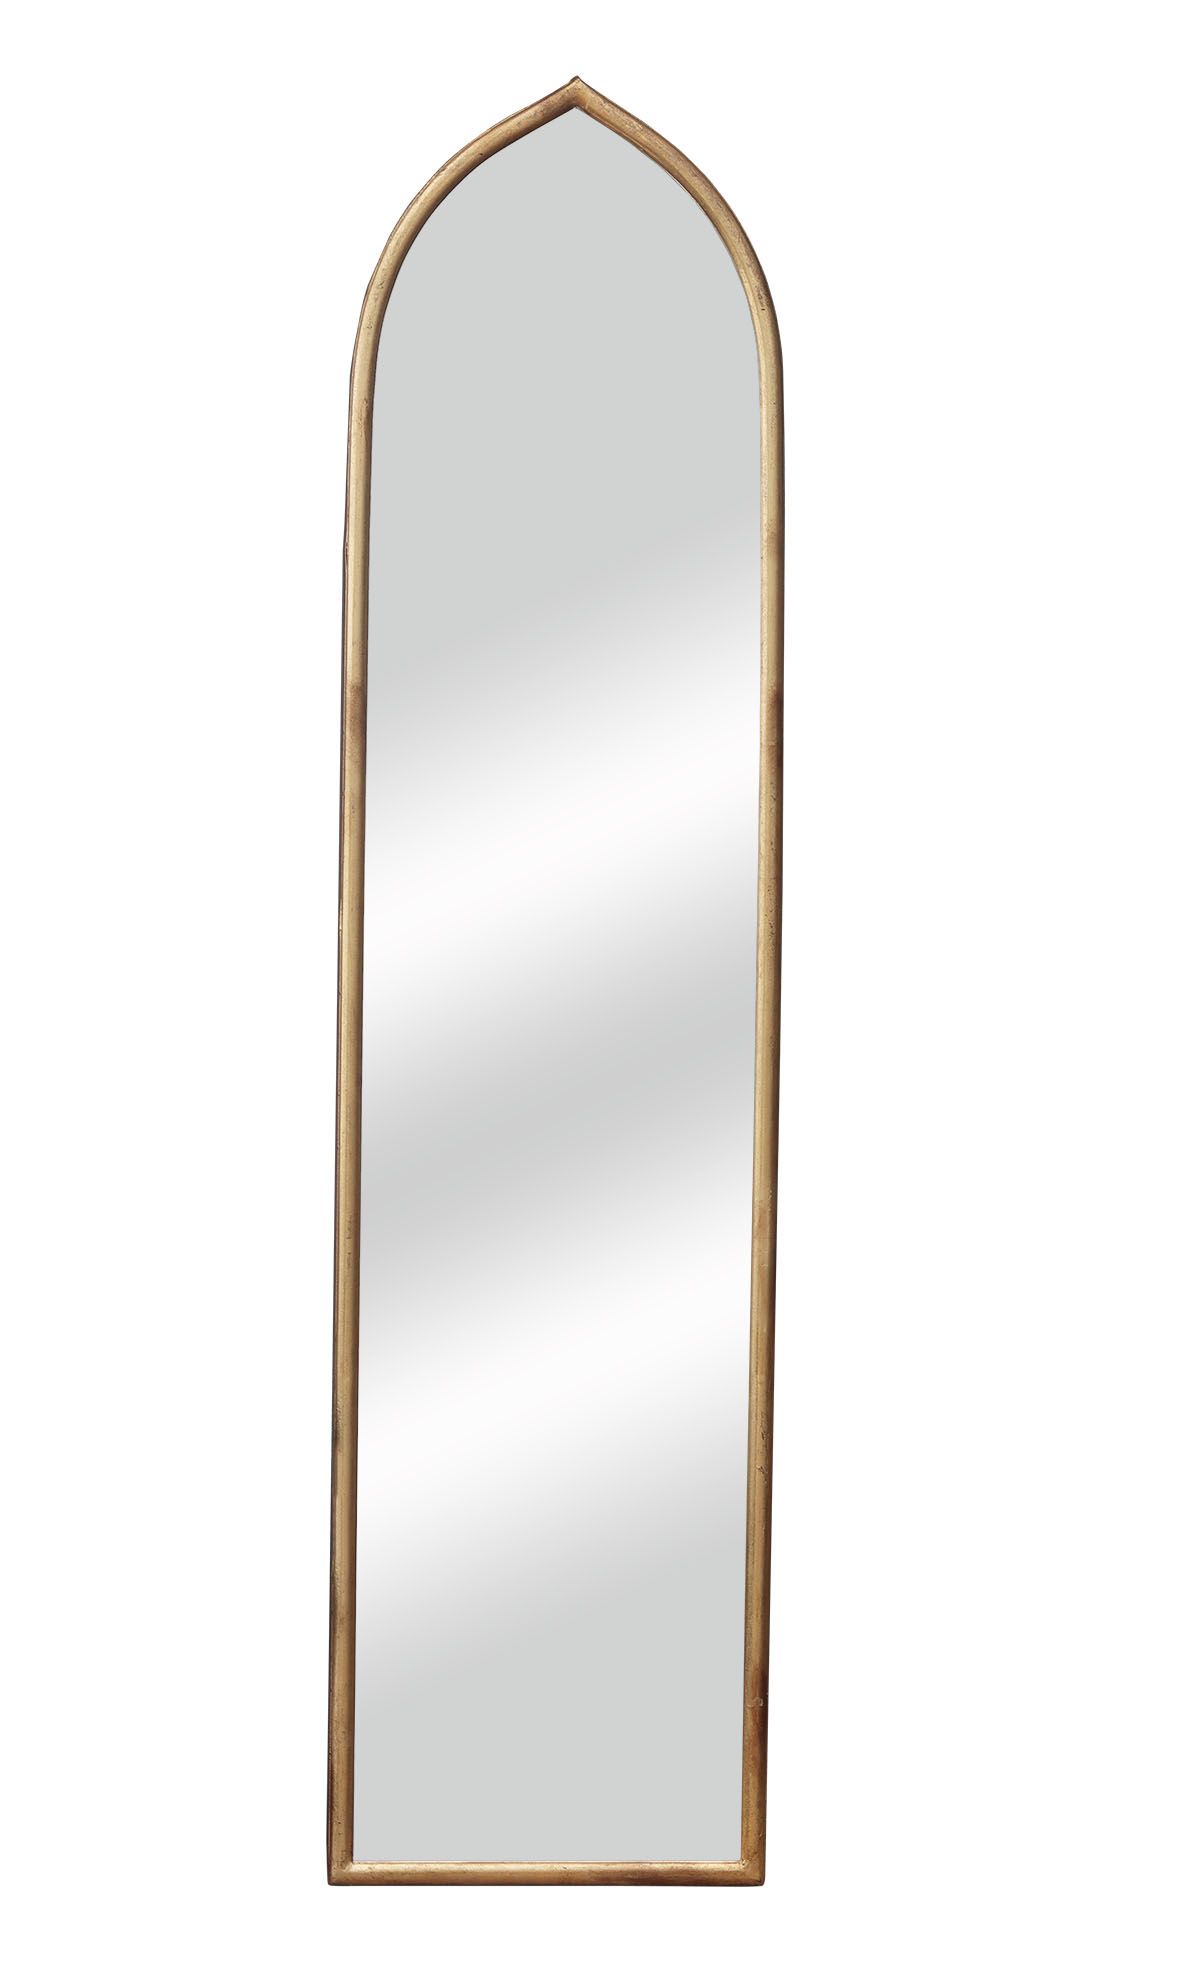 Vintage Full Length Wall Mirror With Arched Metal Frame, Simple Full Within Mirror Framed Bathroom Wall Mirrors (View 10 of 15)